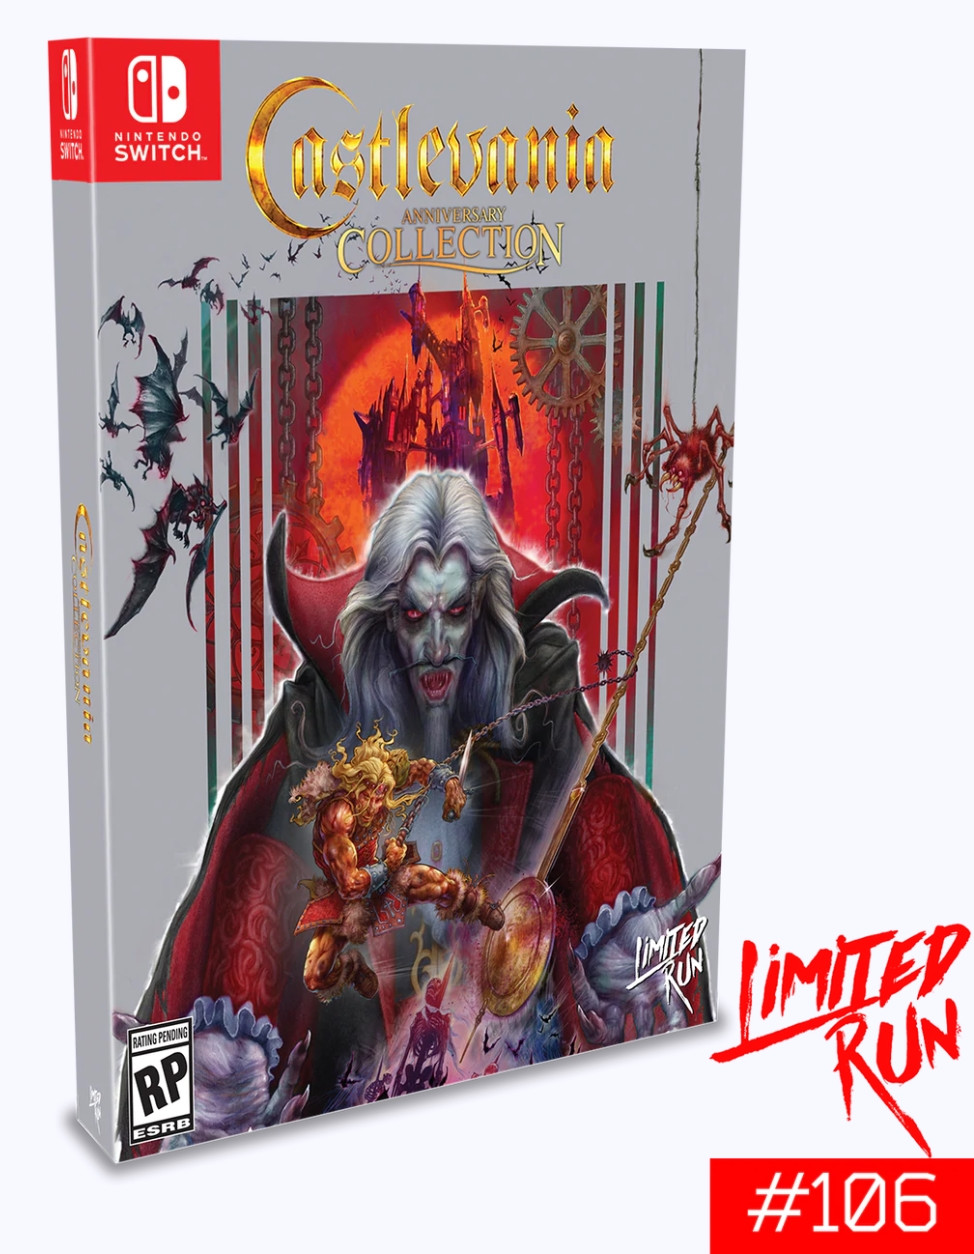 Castlevania - Anniversary Collection Classic Edition (Limited Run Games) kopen?